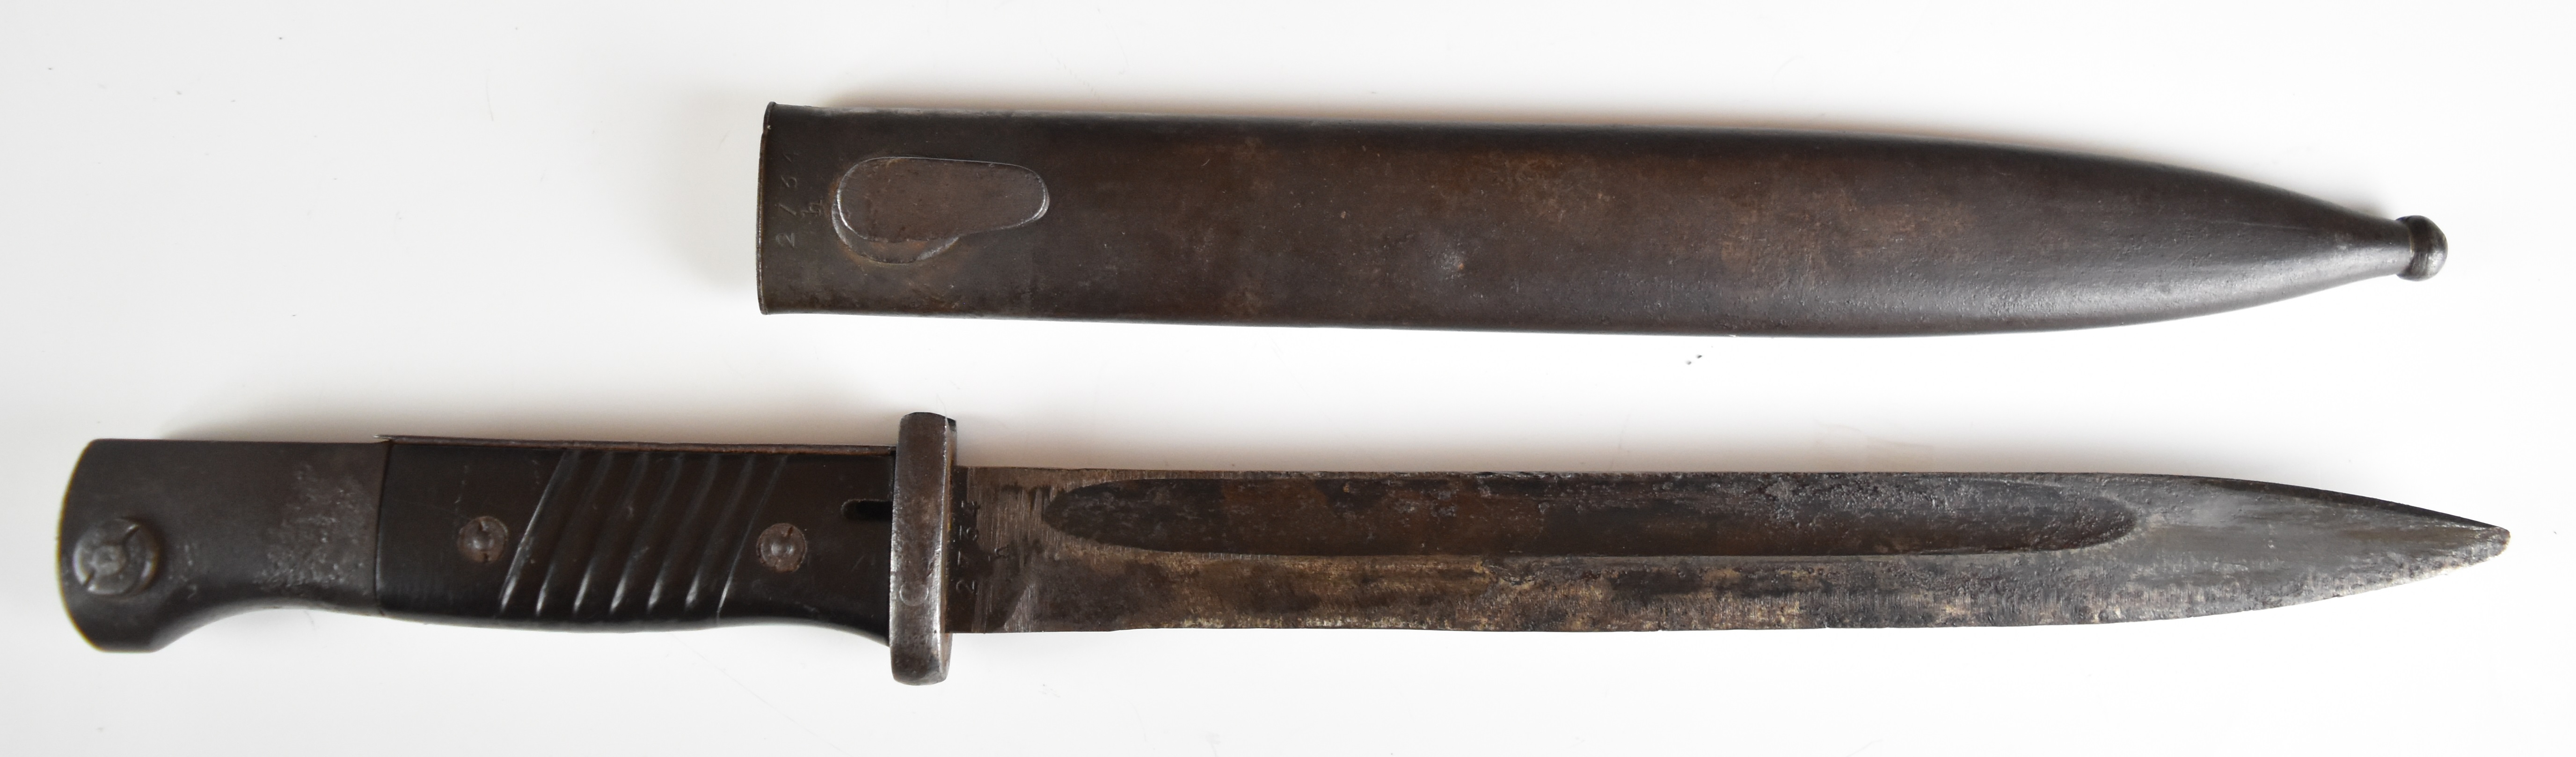 German Mauser bayonet with Bakelite grips, flash guard, 2734 and 43 INJ to ricasso, 25cm fullered